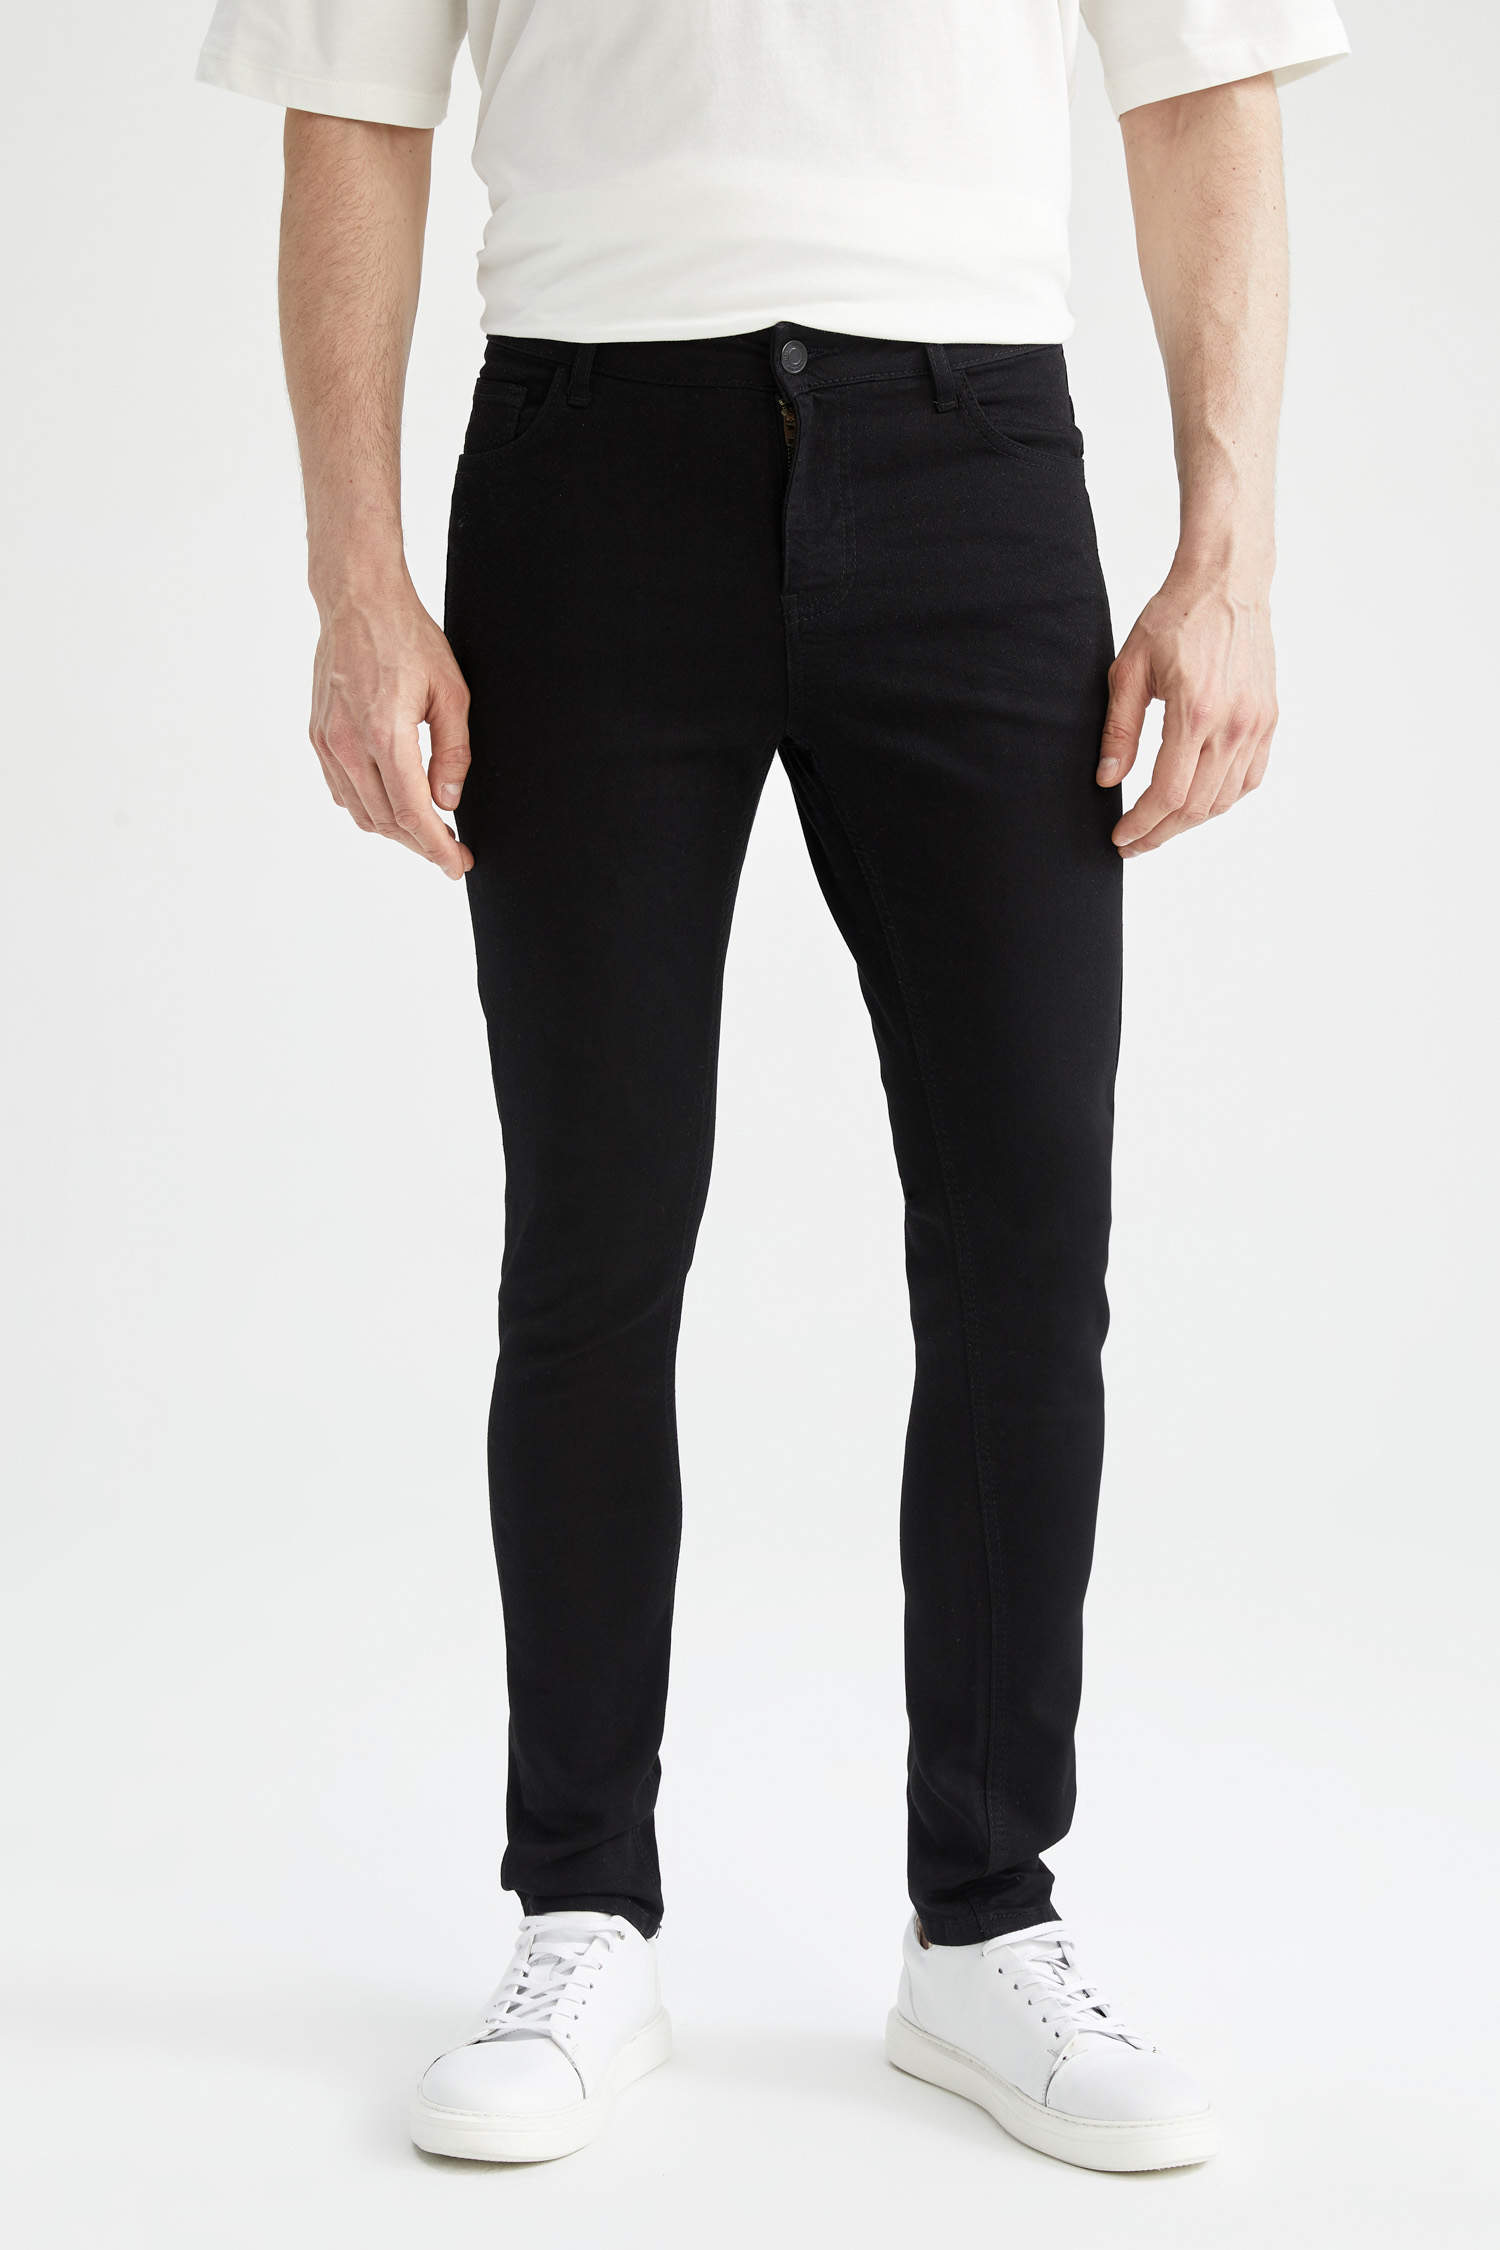 Slim Fit Trousers | Buy cheap Slim Fit Trousers for just £5 on  Everything5pounds.com